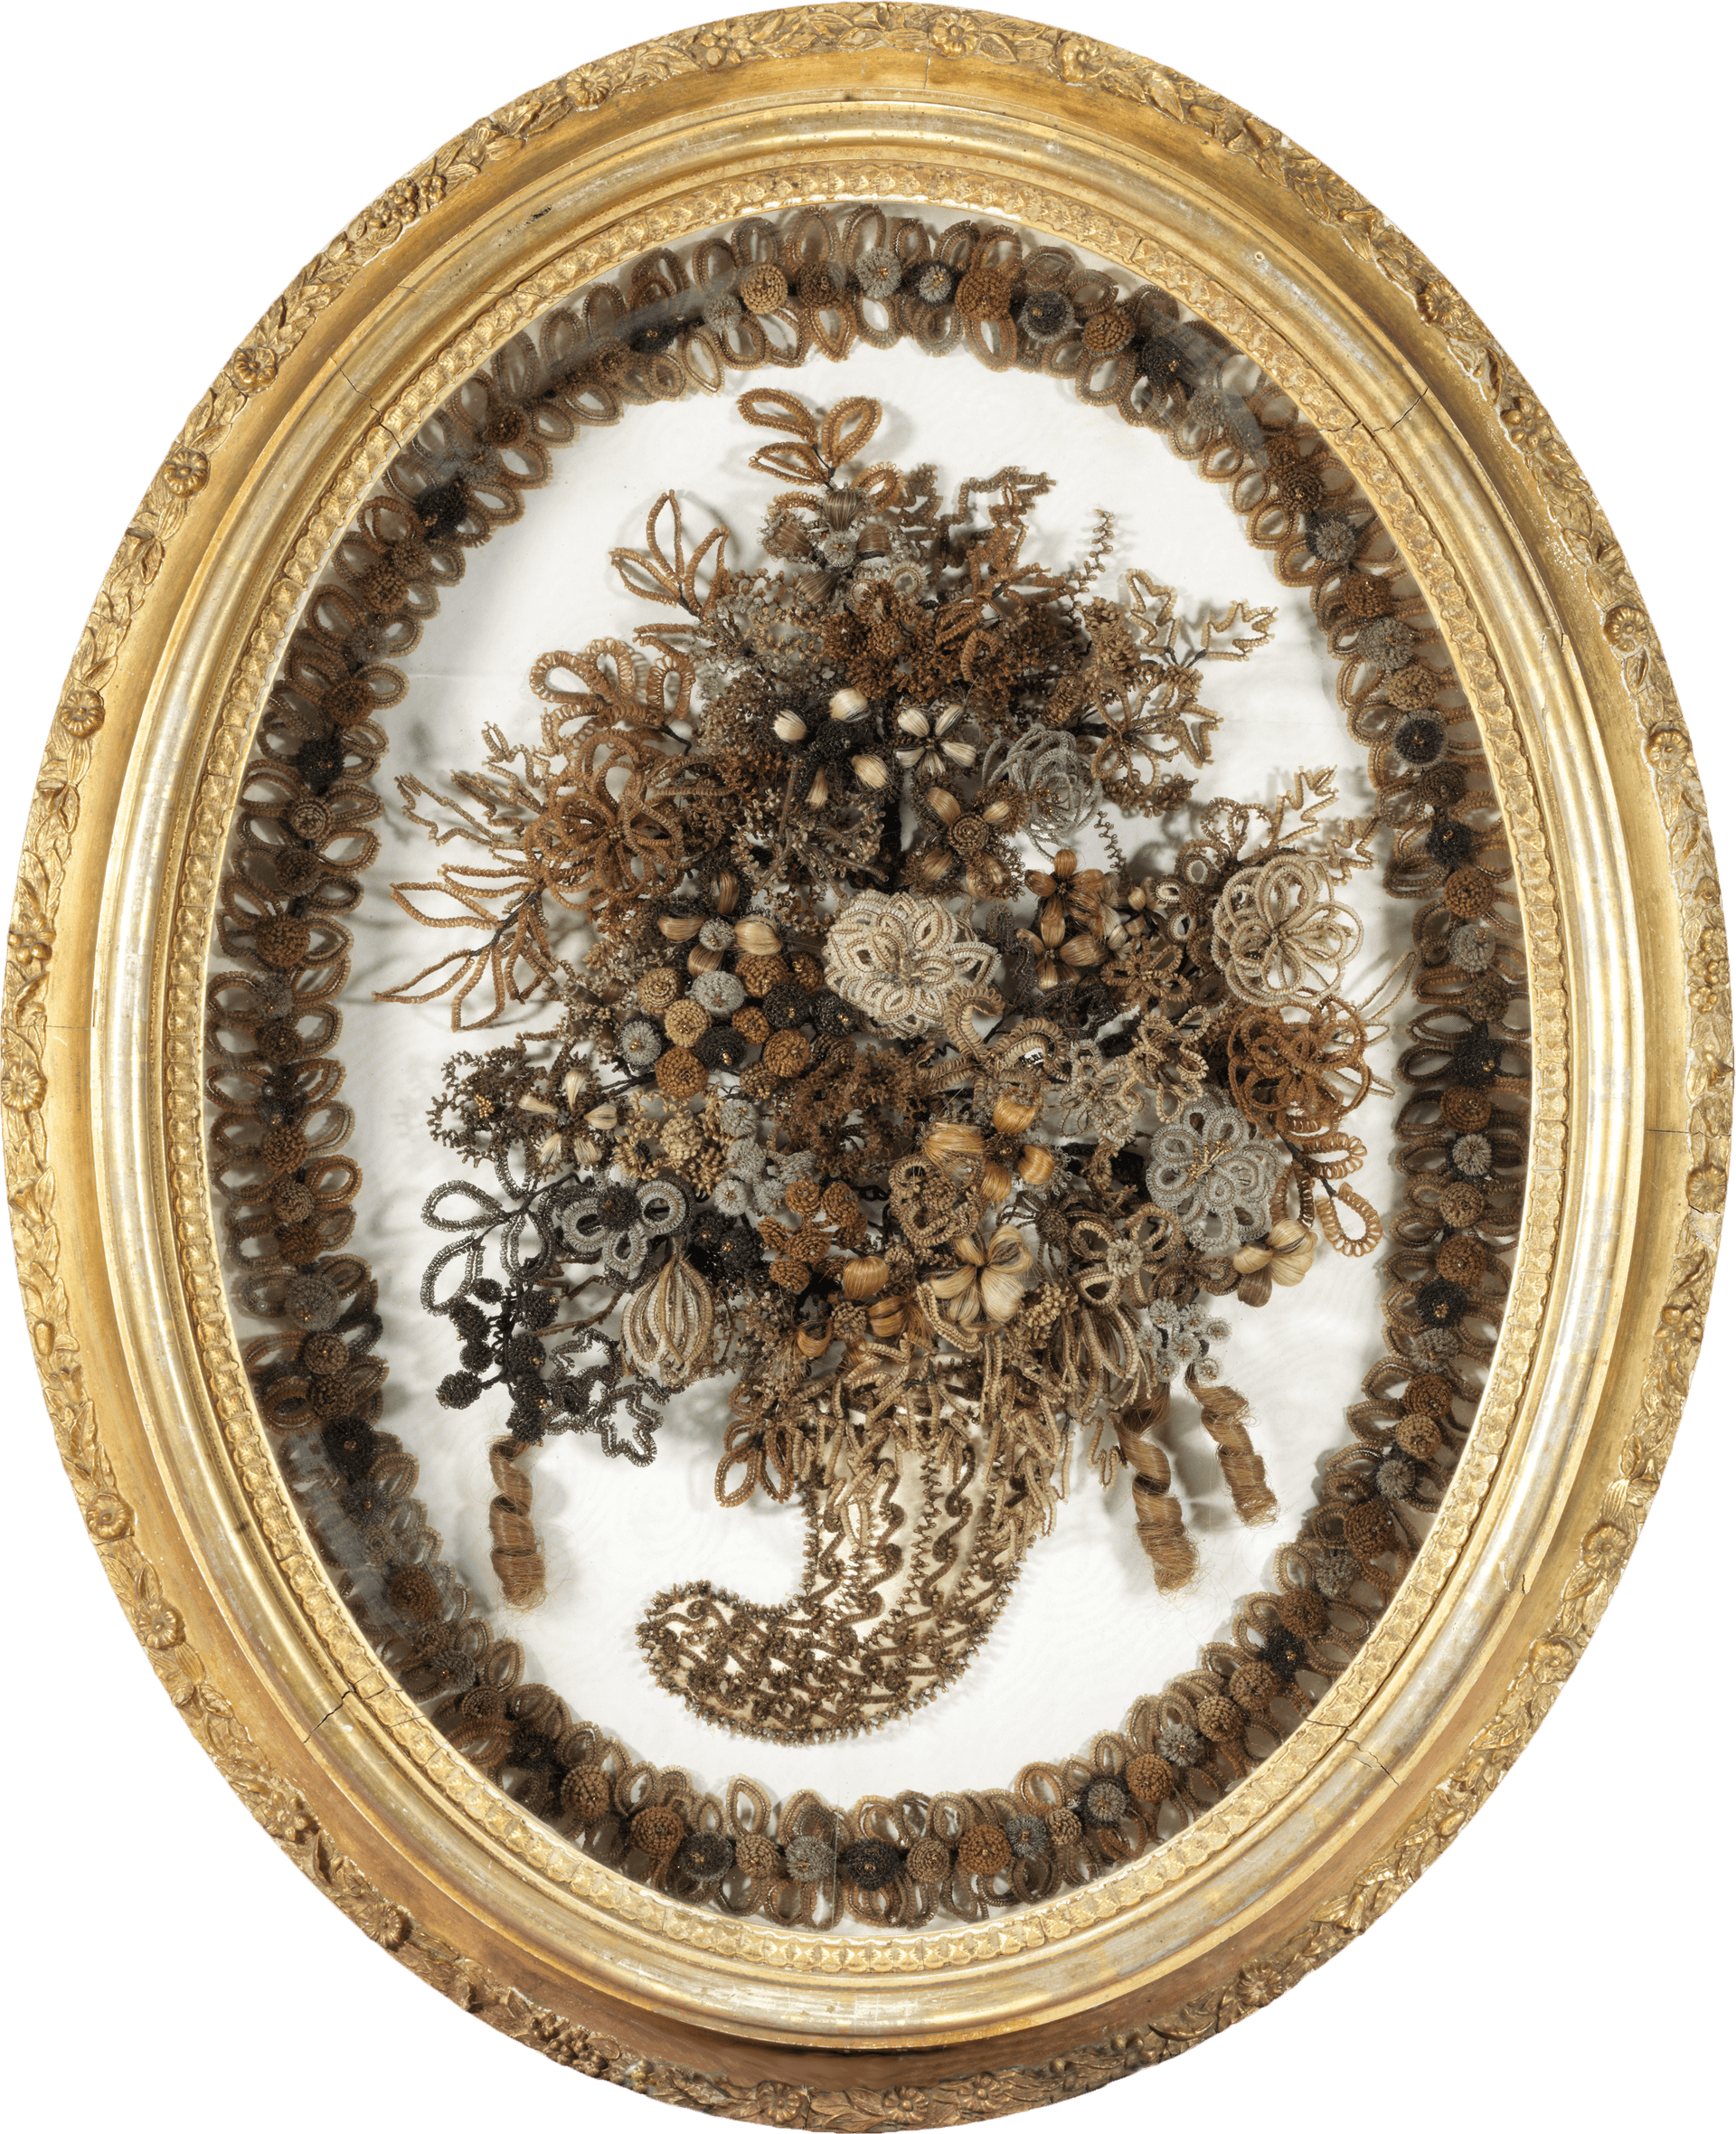 Tightly woven strands of hair arranged like a bouquet and displayed in a golden, oval frame